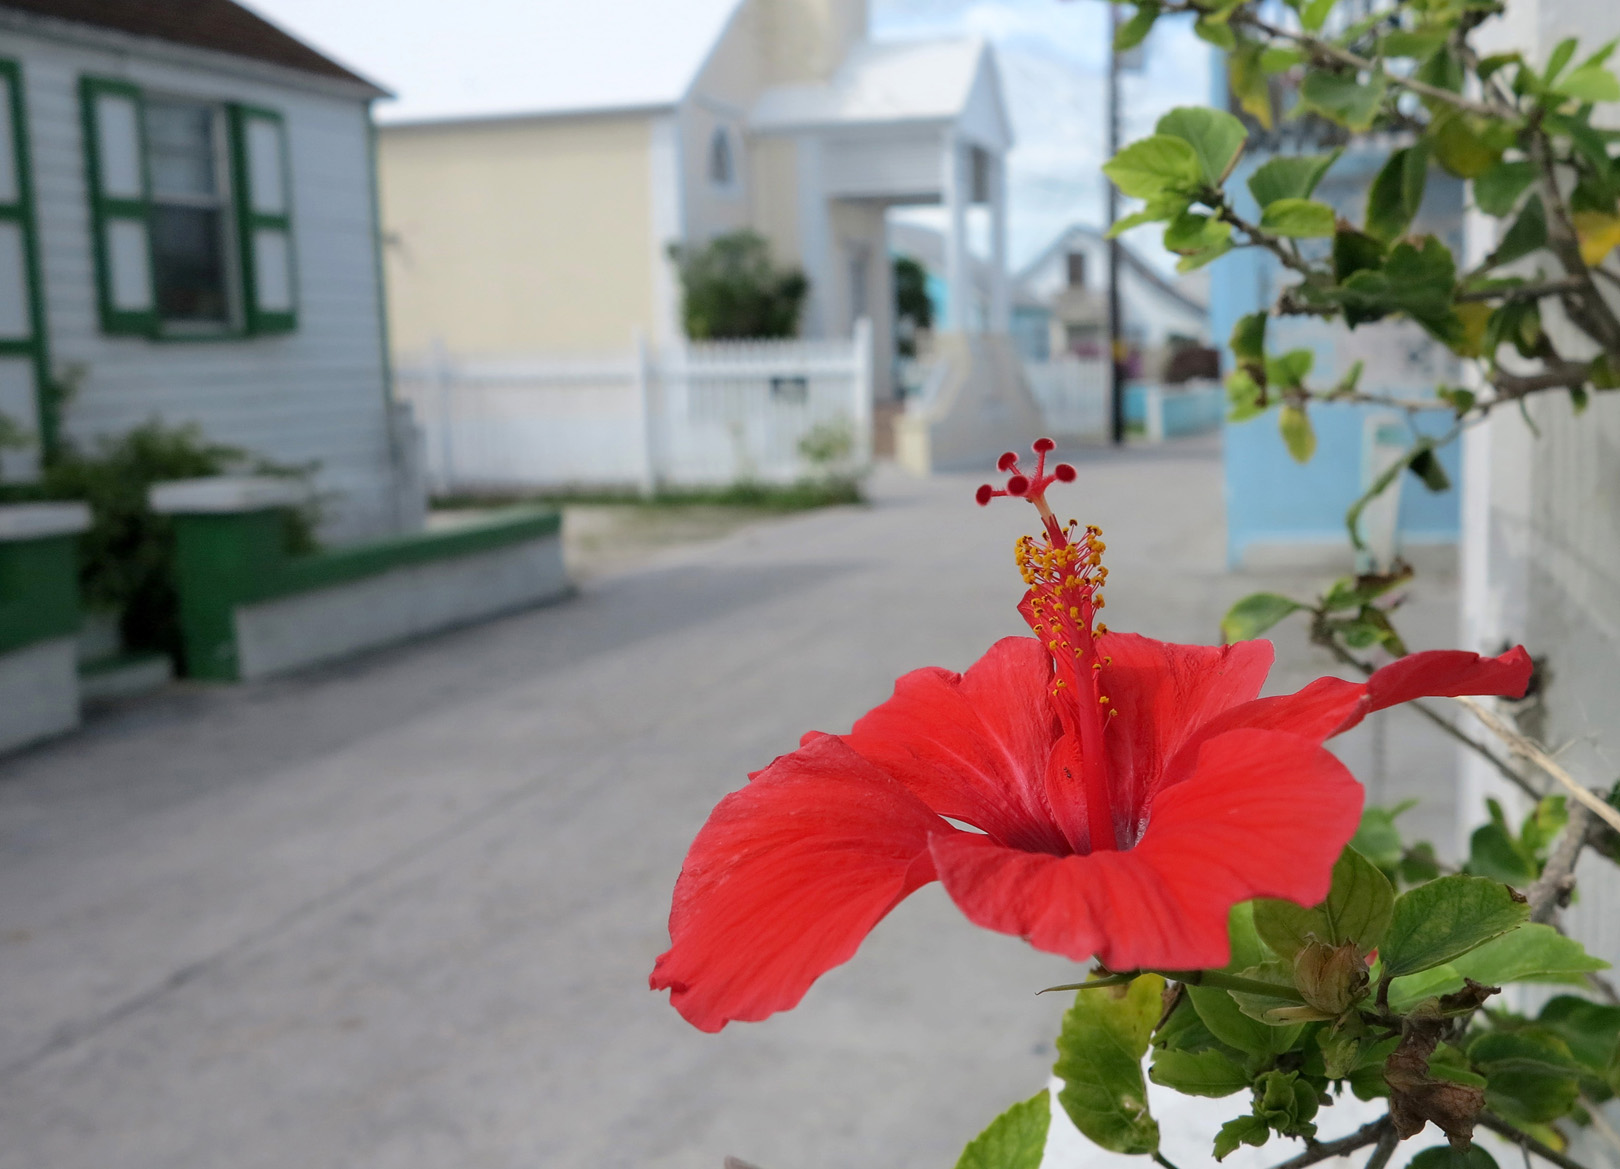 Hibiscus on Parliament Street - Green Turtle Cay, Abaco, Bahamas.